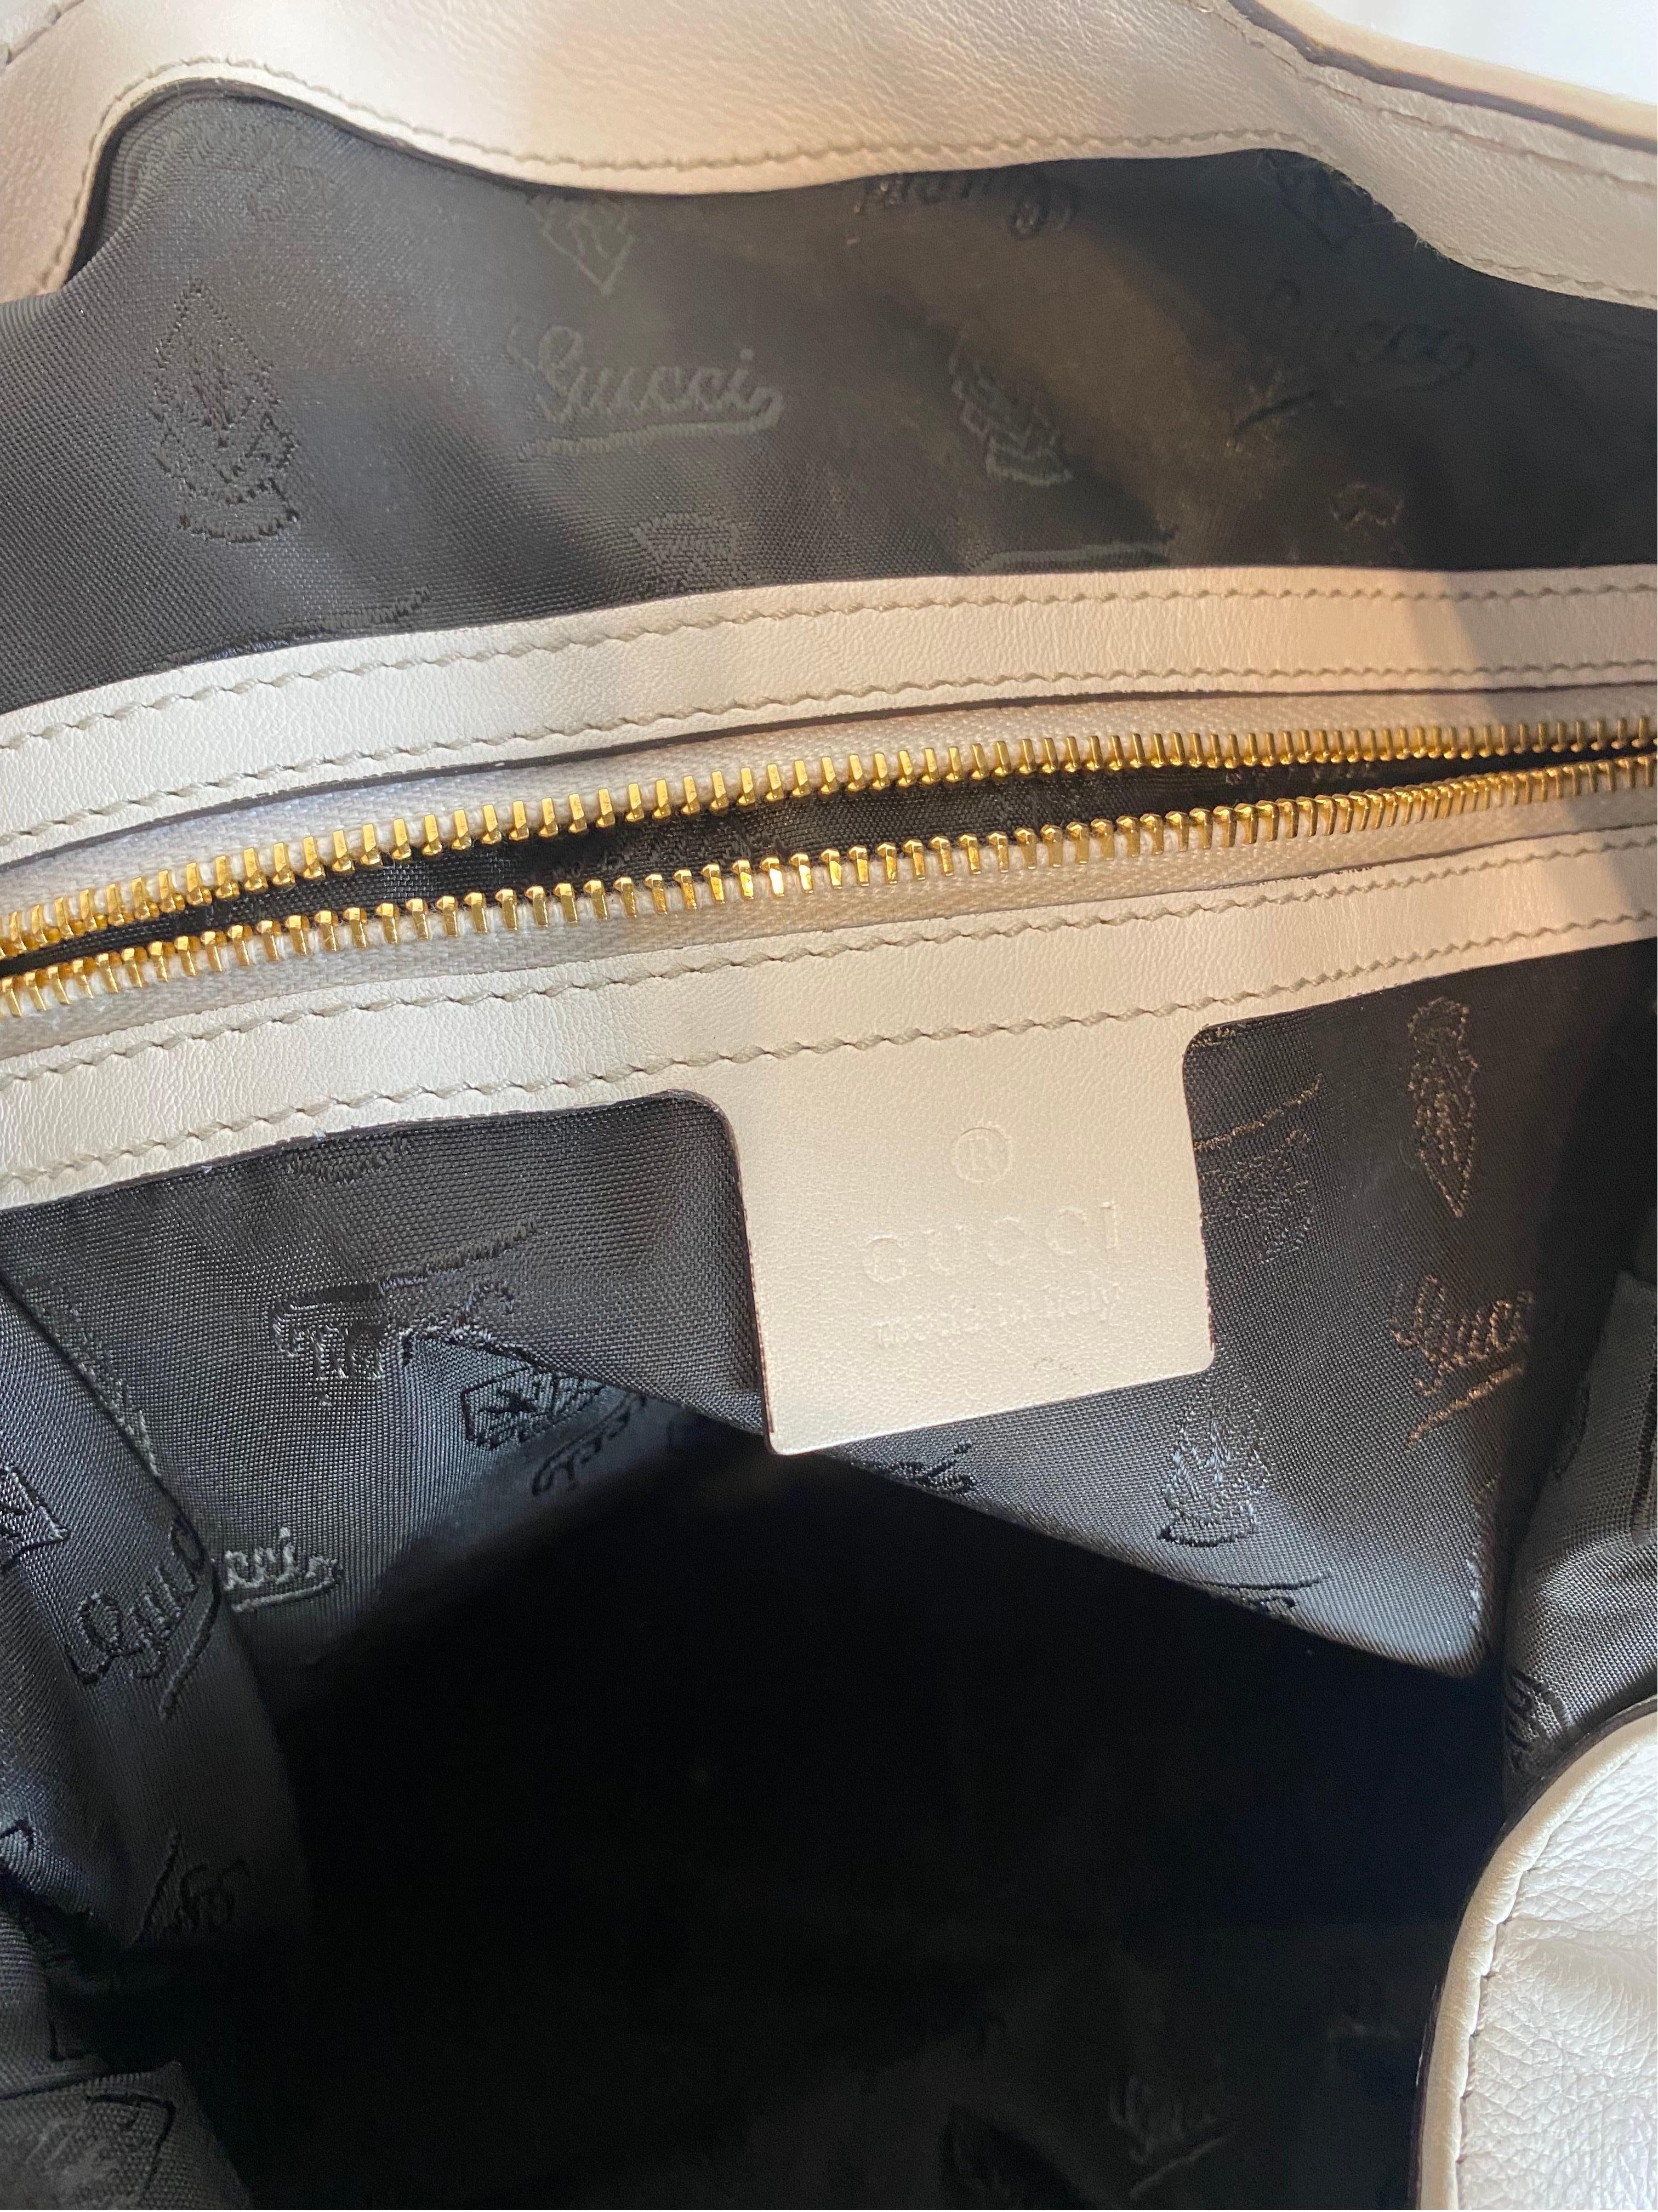 Gucci Bag Large New Jackie Hobo For Sale 4